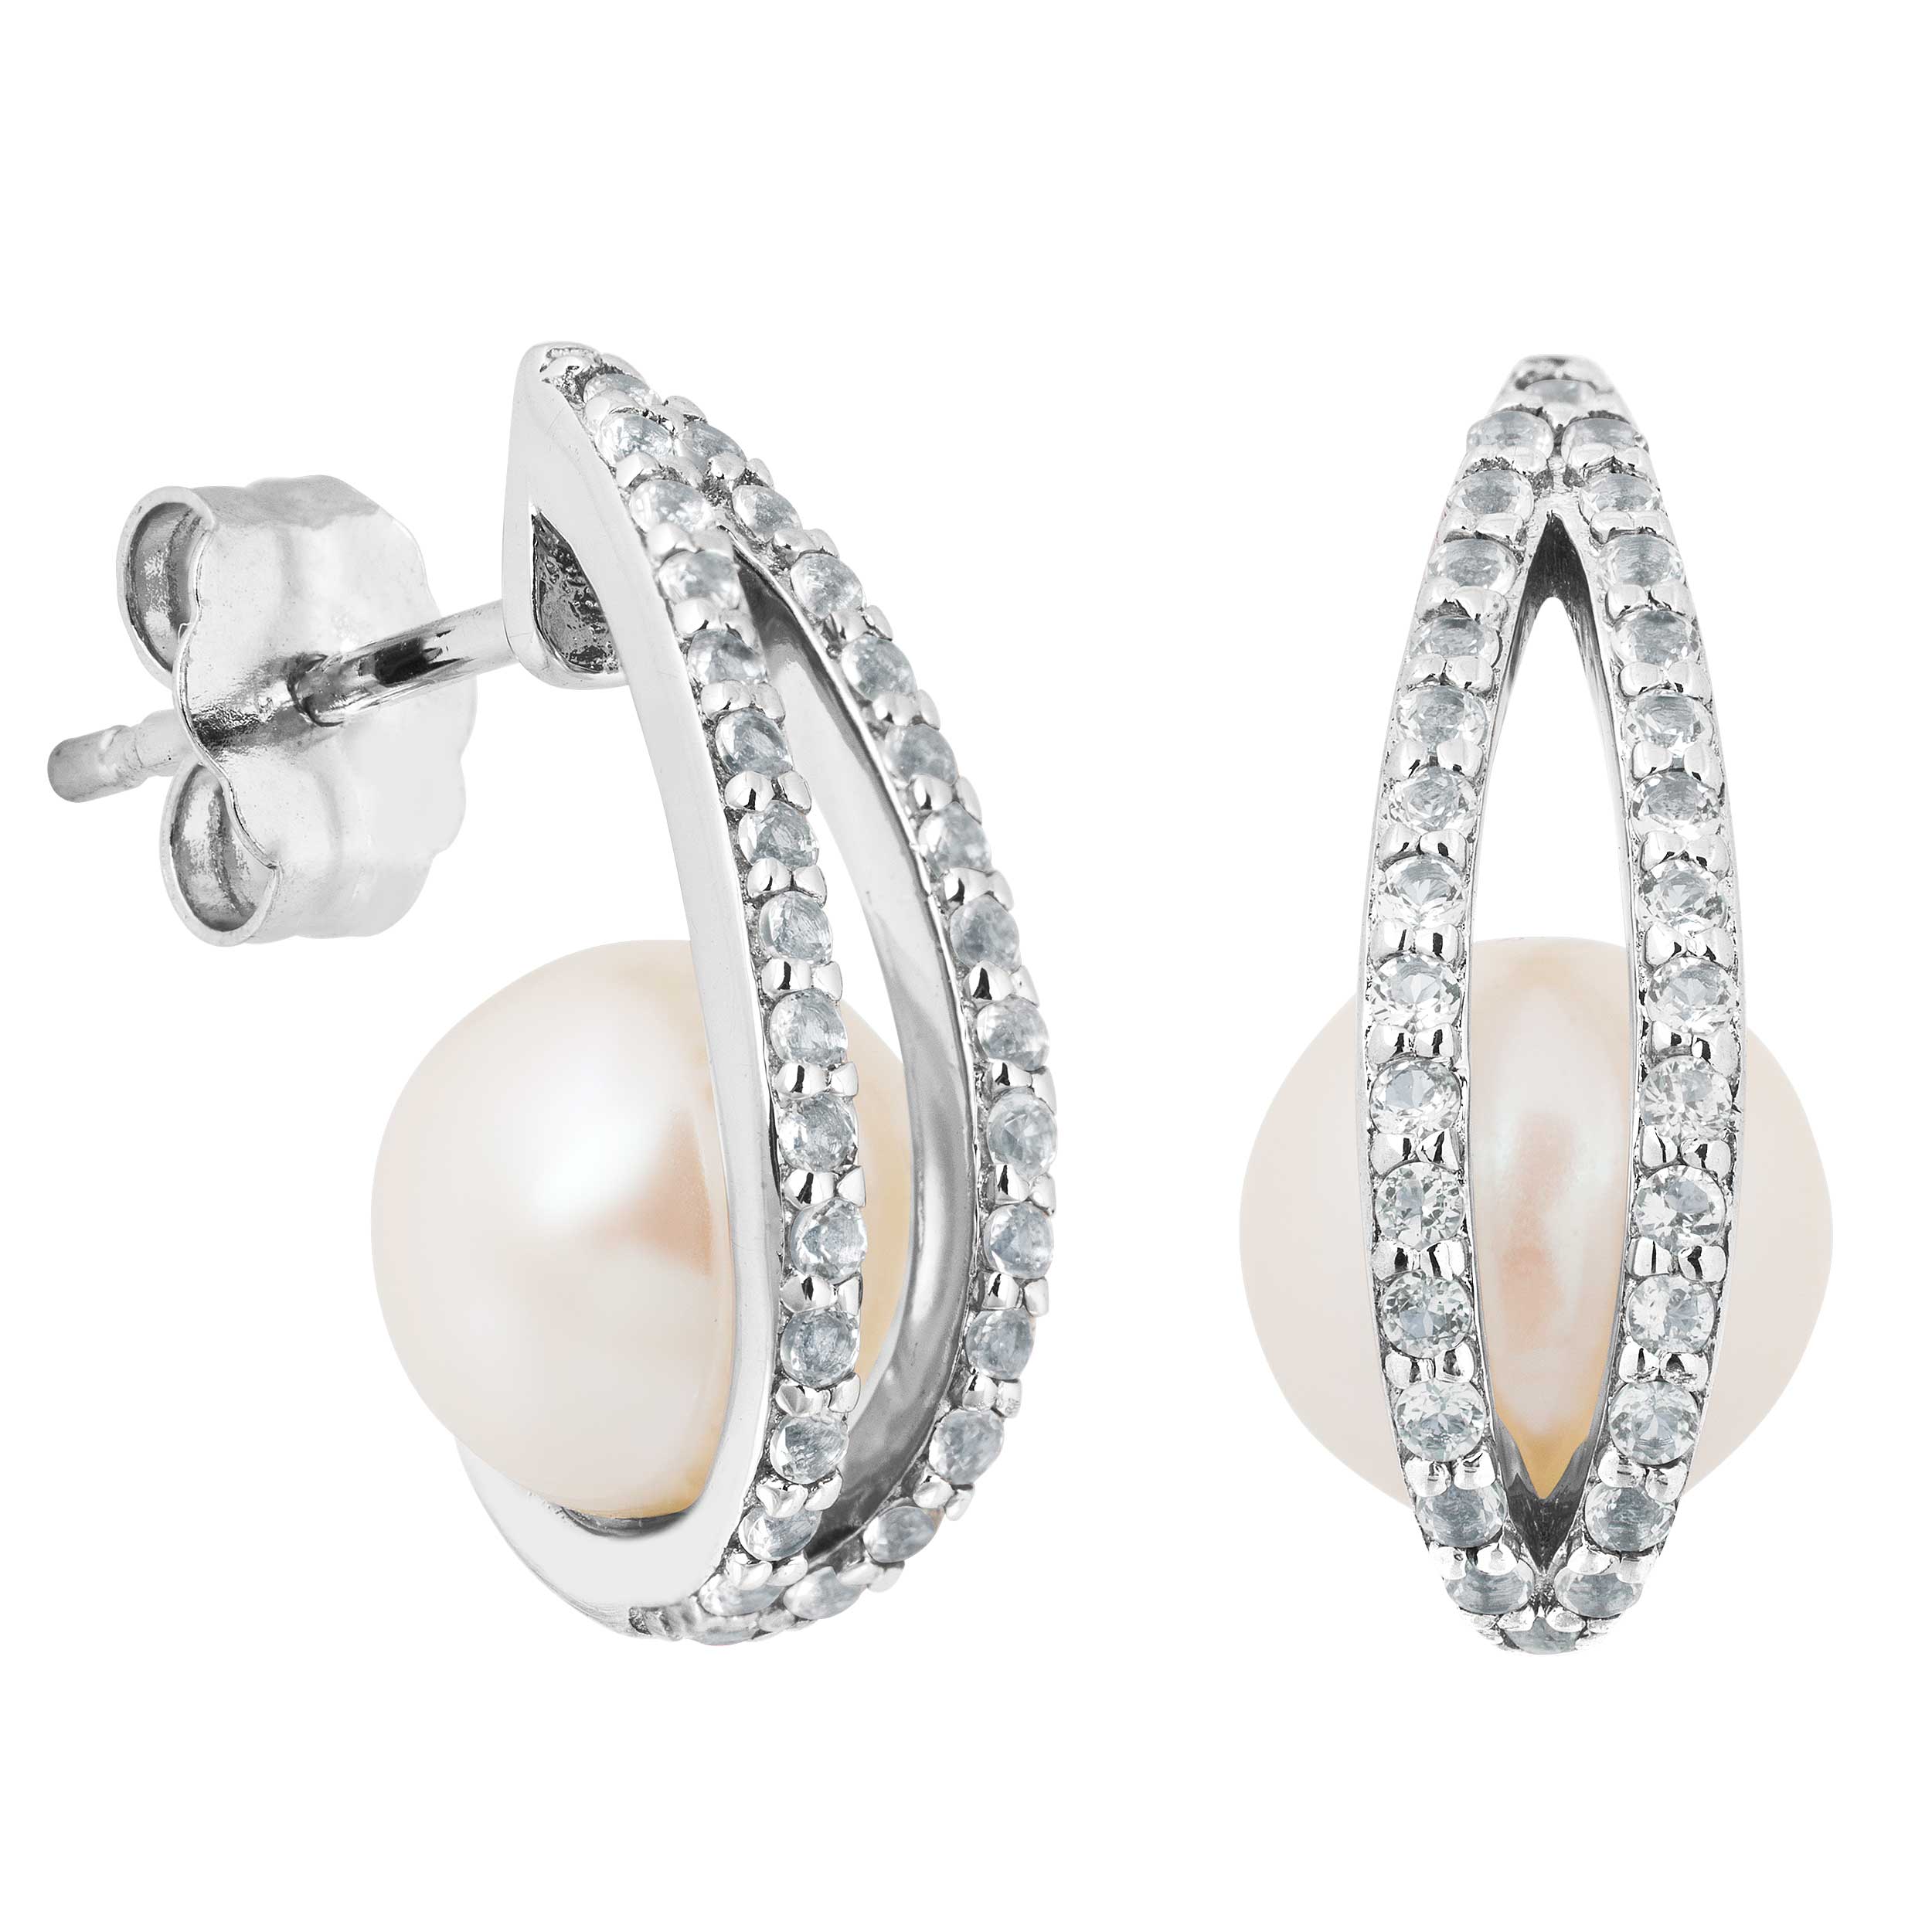 Round White freshwater cultured pearl Earrings, Rhodium Plated Sterling Silver